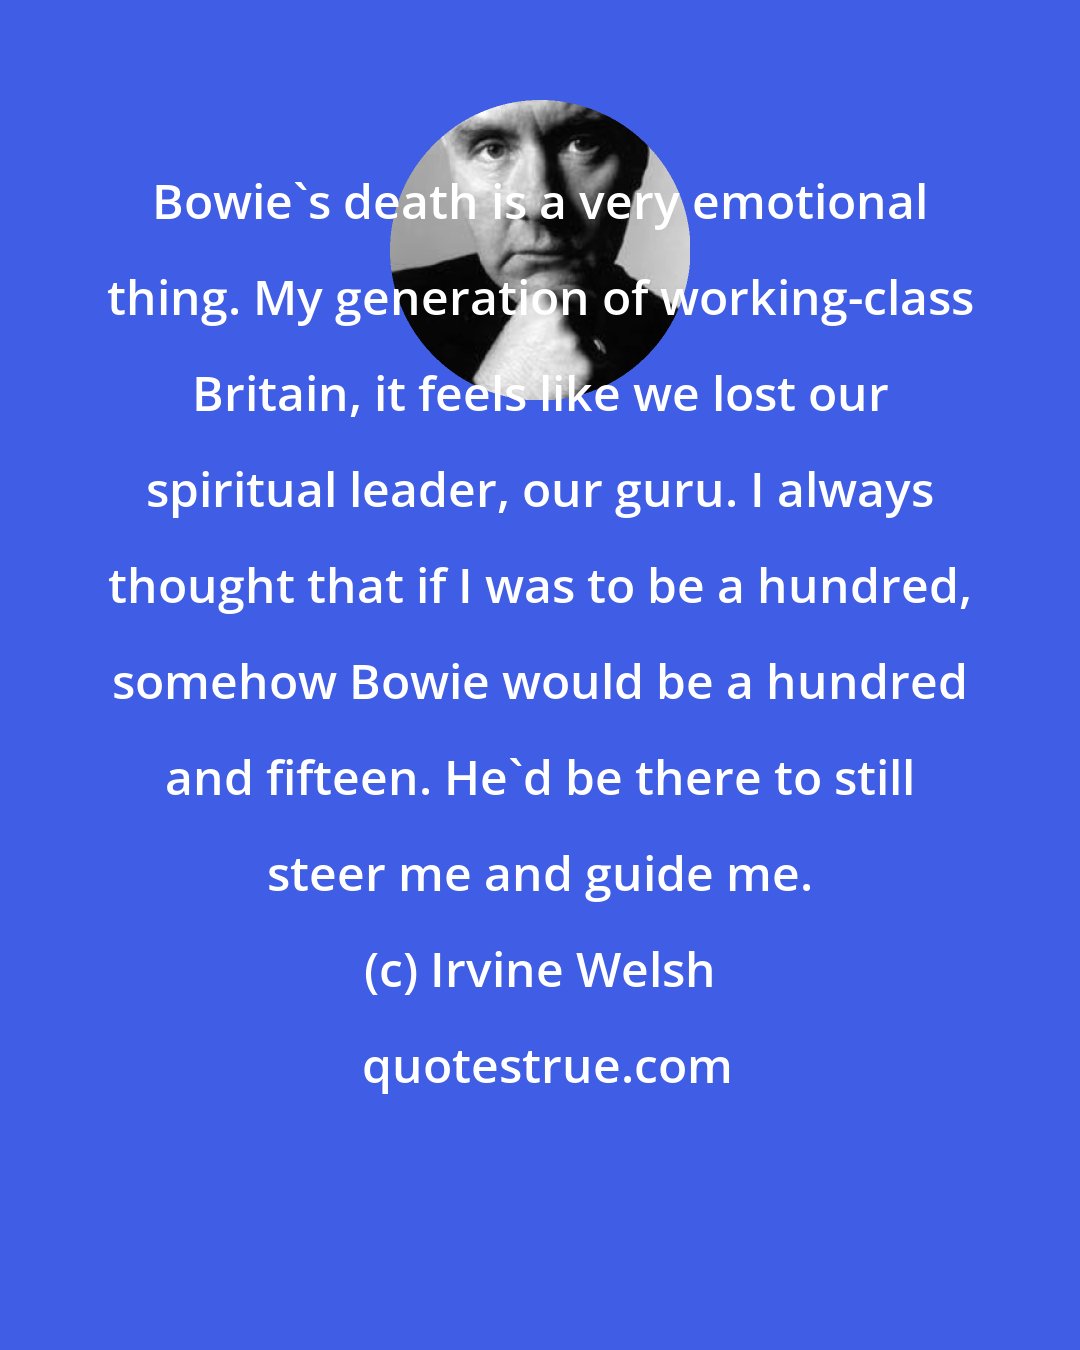 Irvine Welsh: Bowie's death is a very emotional thing. My generation of working-class Britain, it feels like we lost our spiritual leader, our guru. I always thought that if I was to be a hundred, somehow Bowie would be a hundred and fifteen. He'd be there to still steer me and guide me.